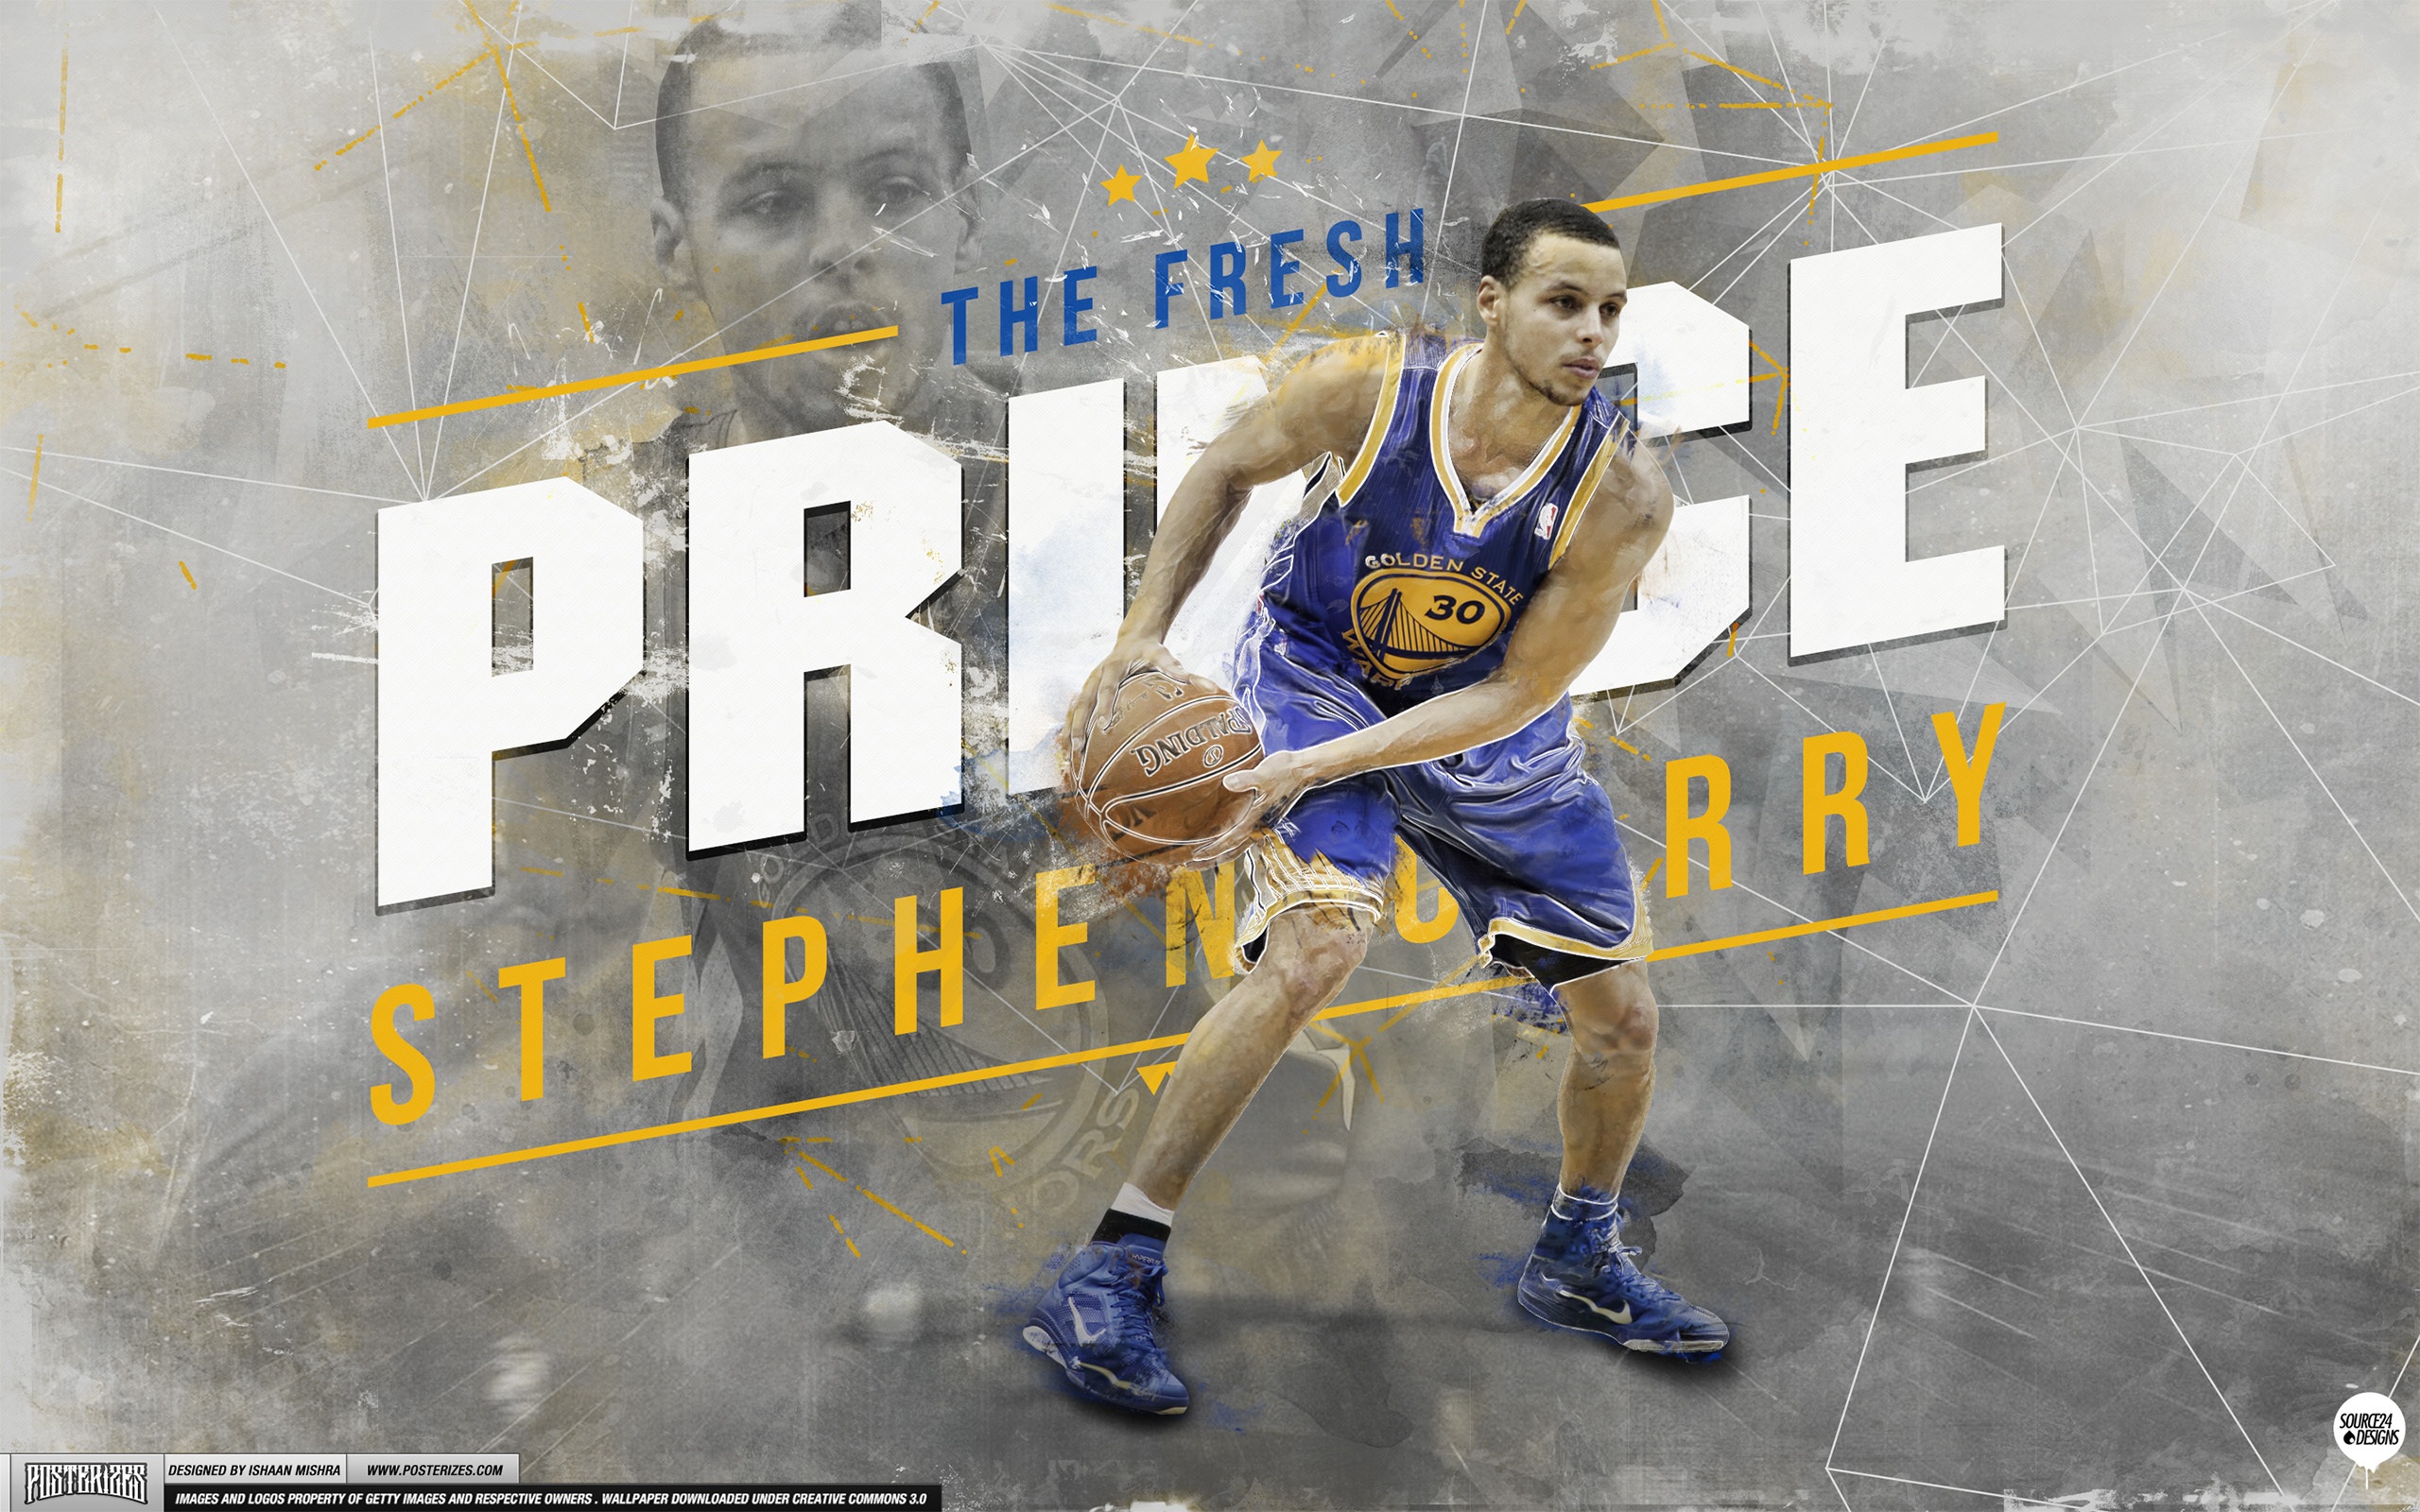 Stephen Curry Iphone Wallpaper Steph curry the fresh prince